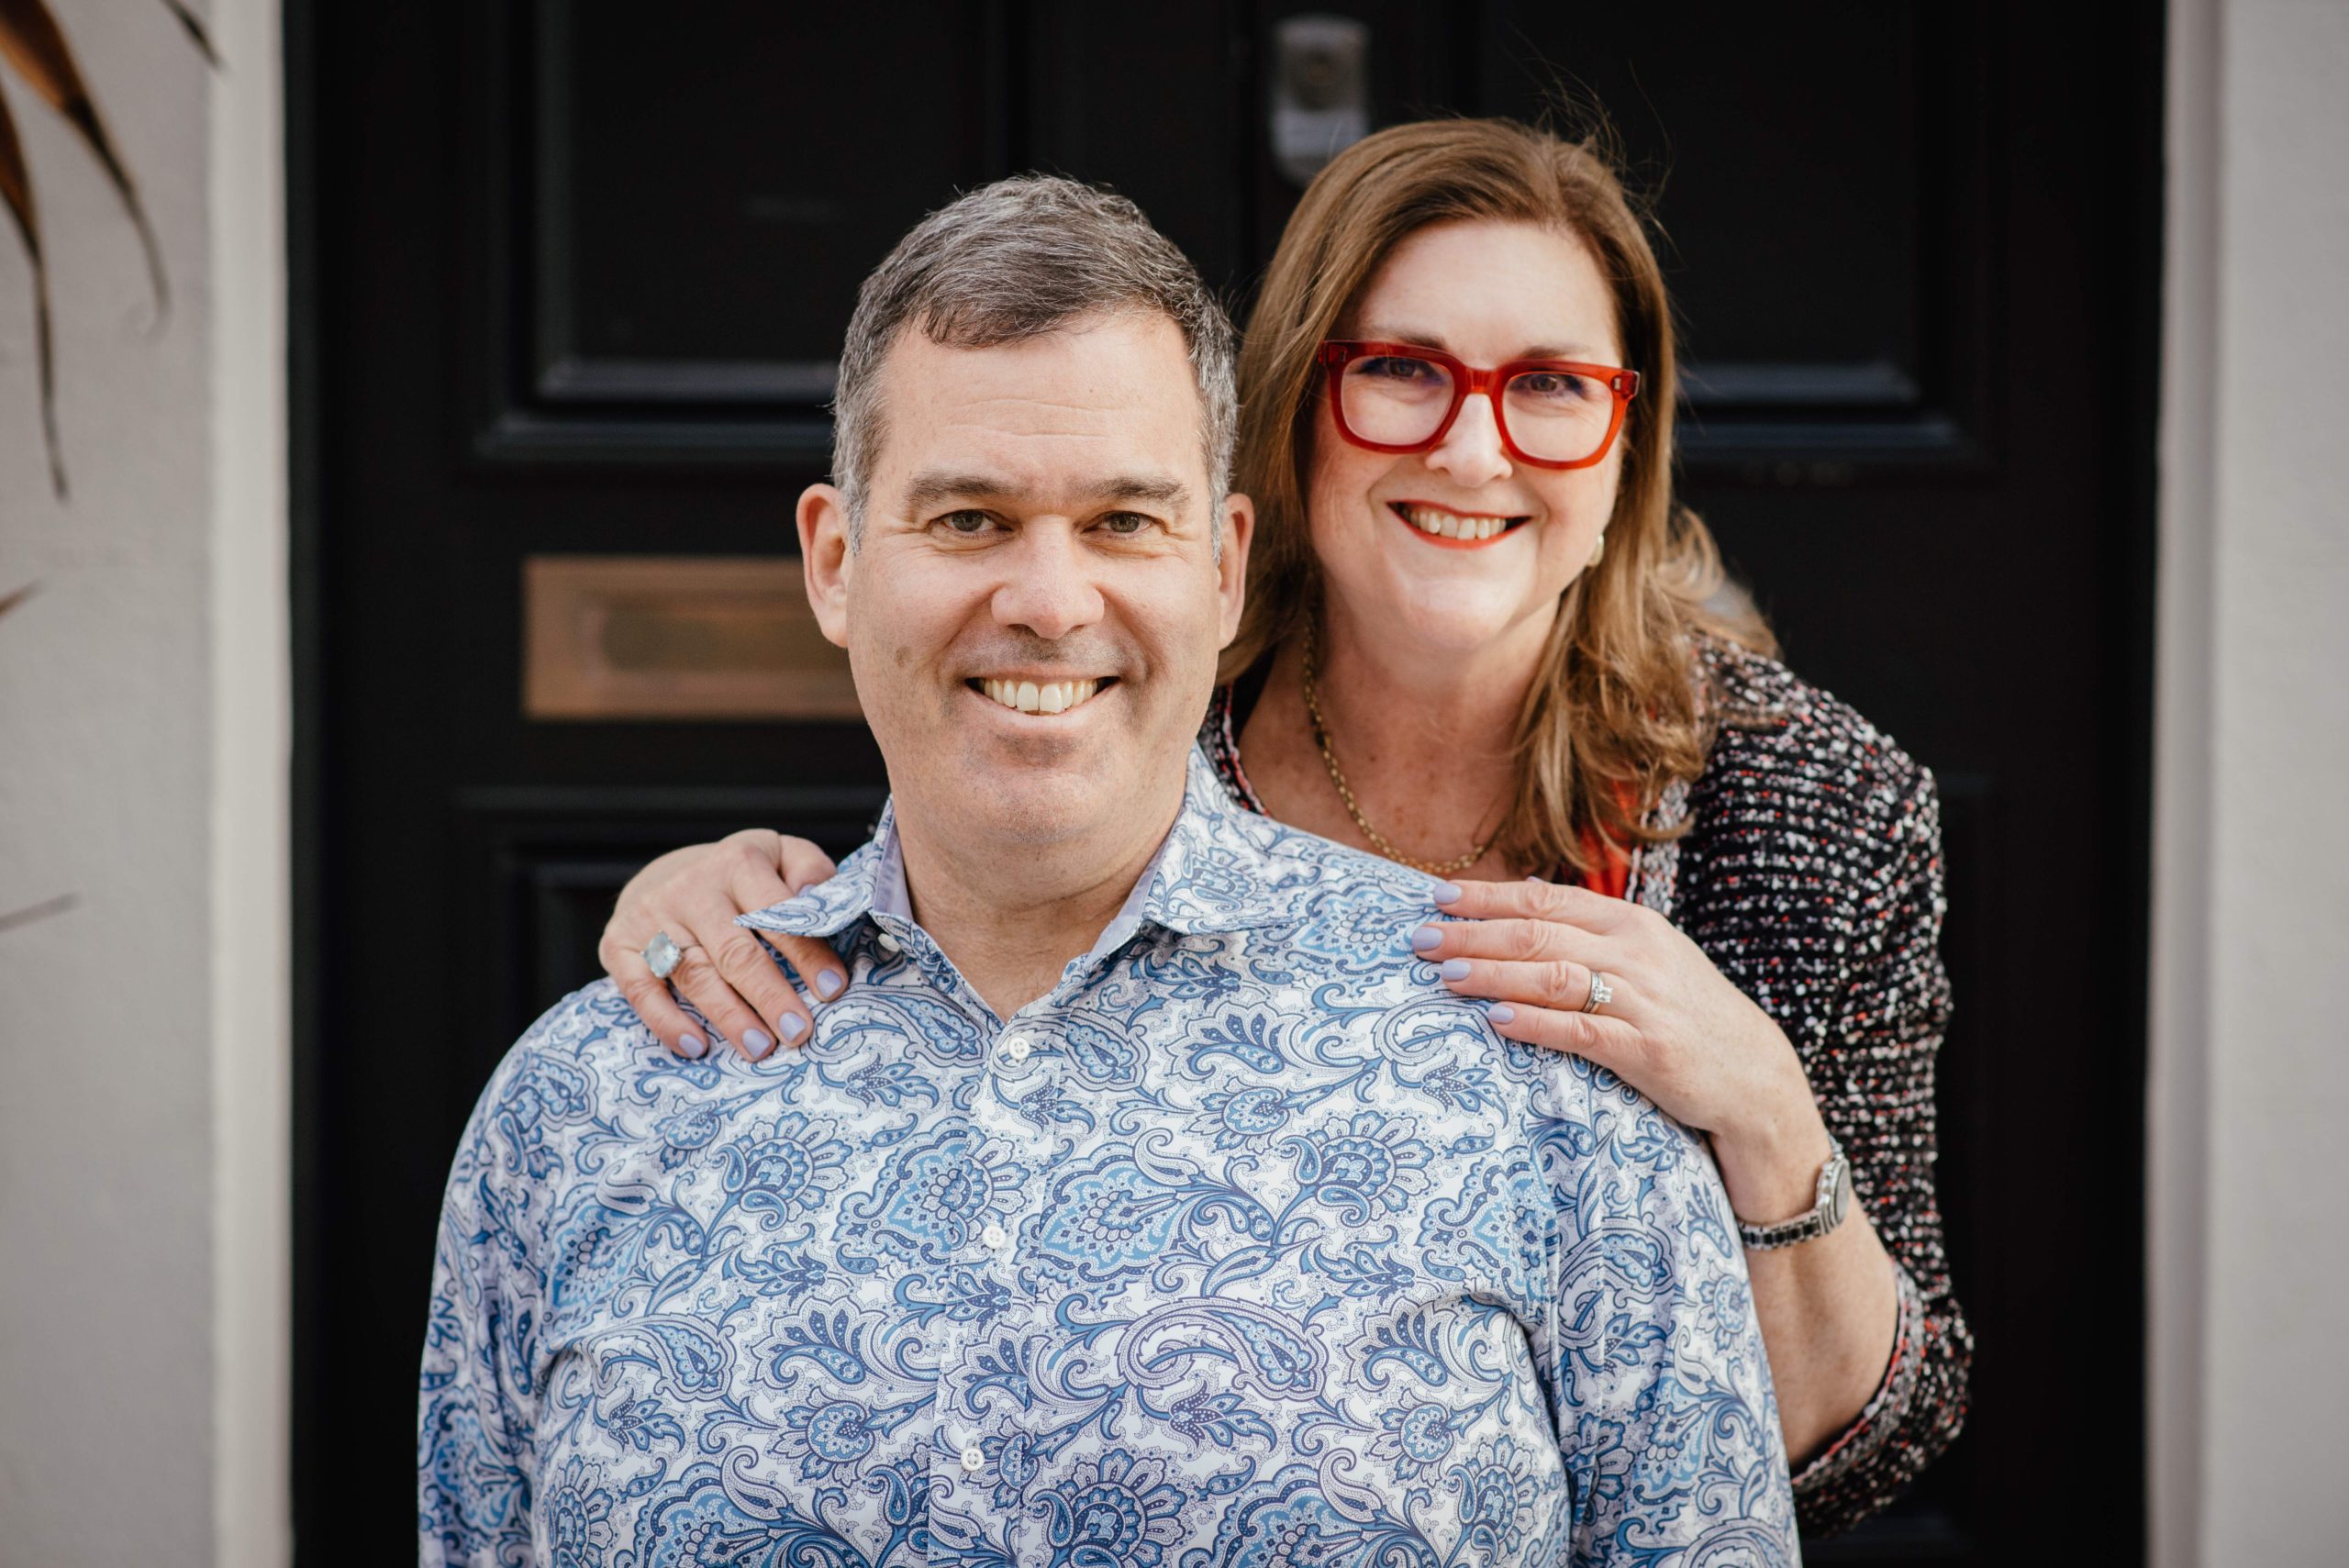 Anne Cutting and Dean McKenna are directors of Cassia Digital Agency, London web design and SEO agency.